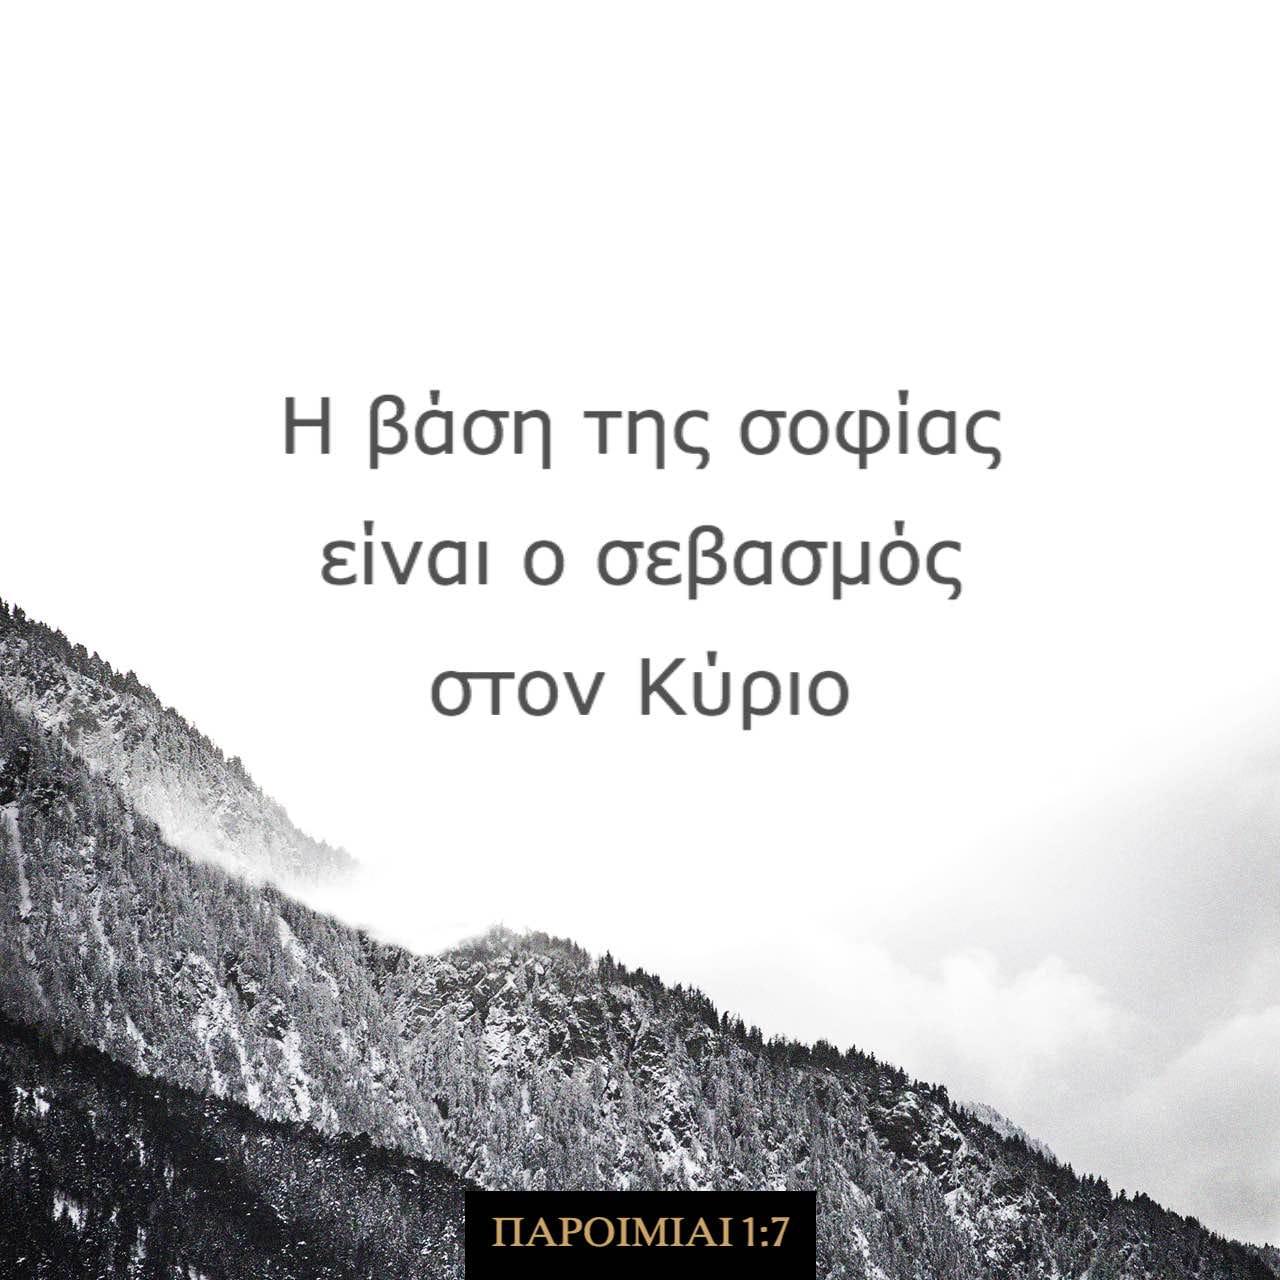 Bible Verse of the Day - day 82 - image 37551 (ΠΑΡΟΙΜΙΑΙ 1:7)